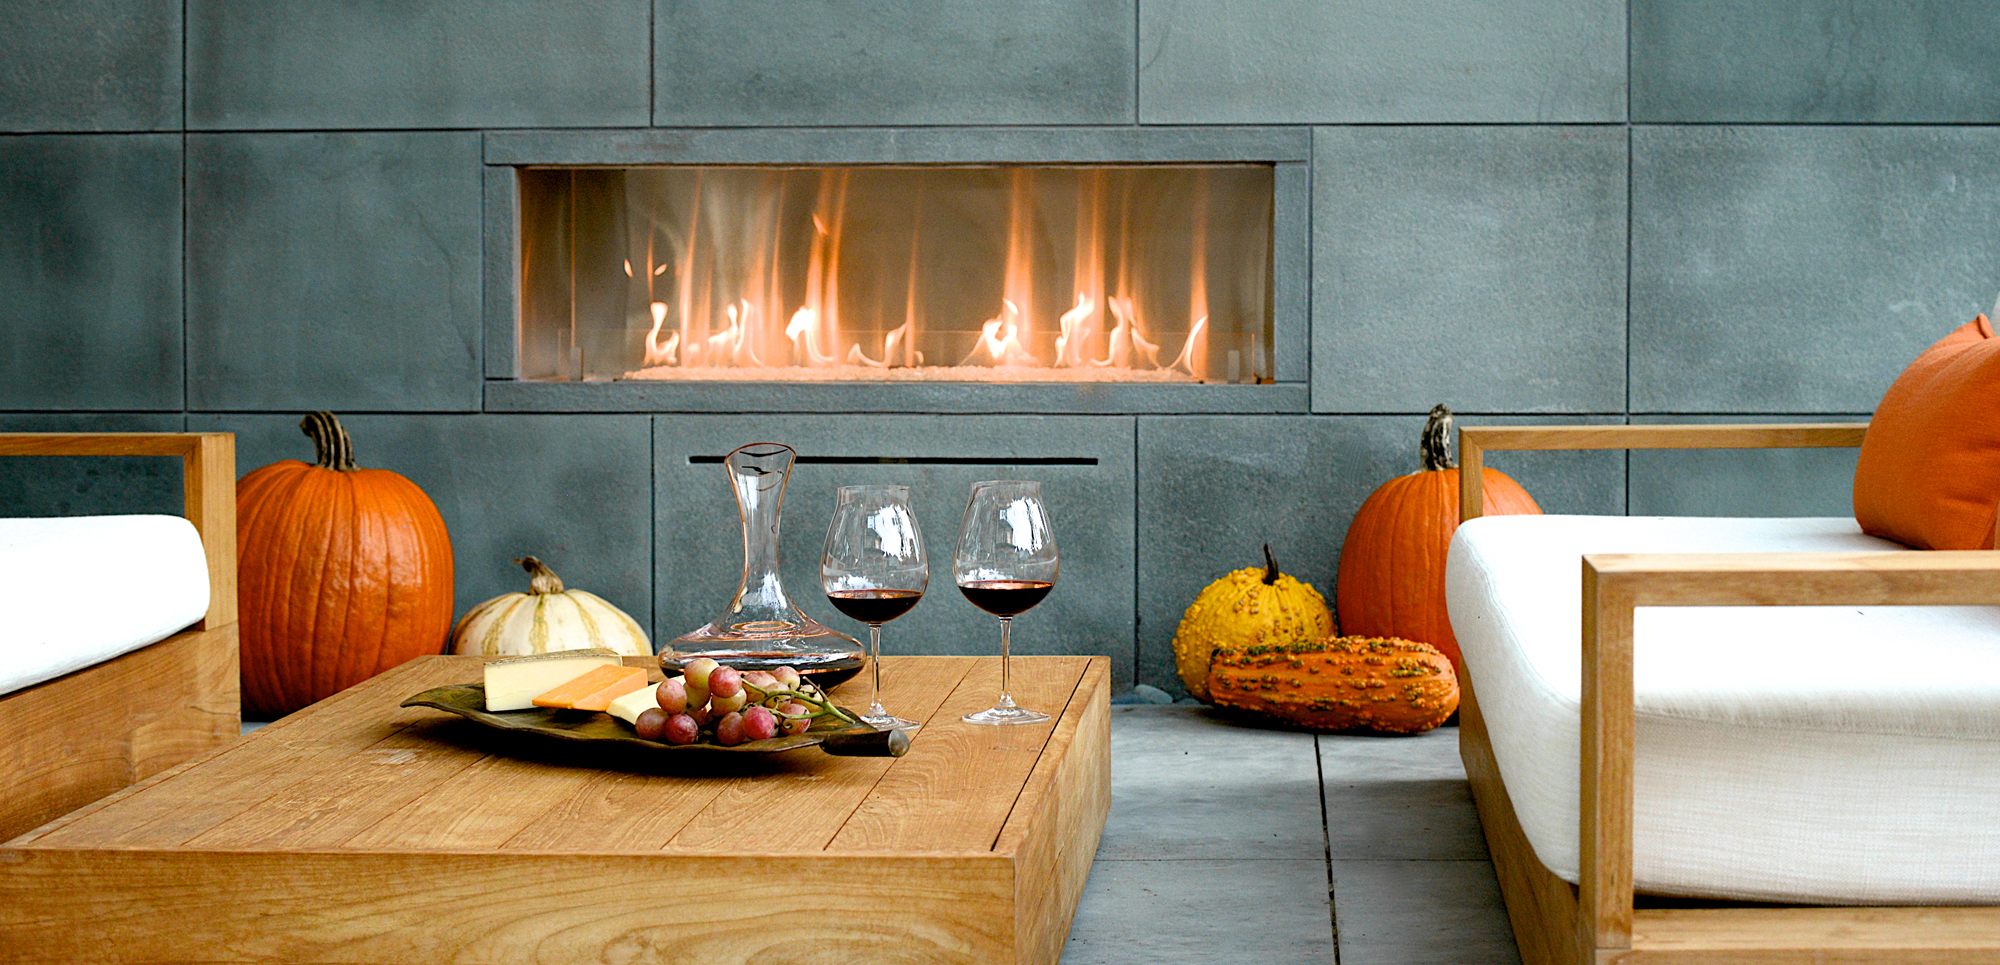 4 Sided Fireplace Best Of Spark Modern Fires